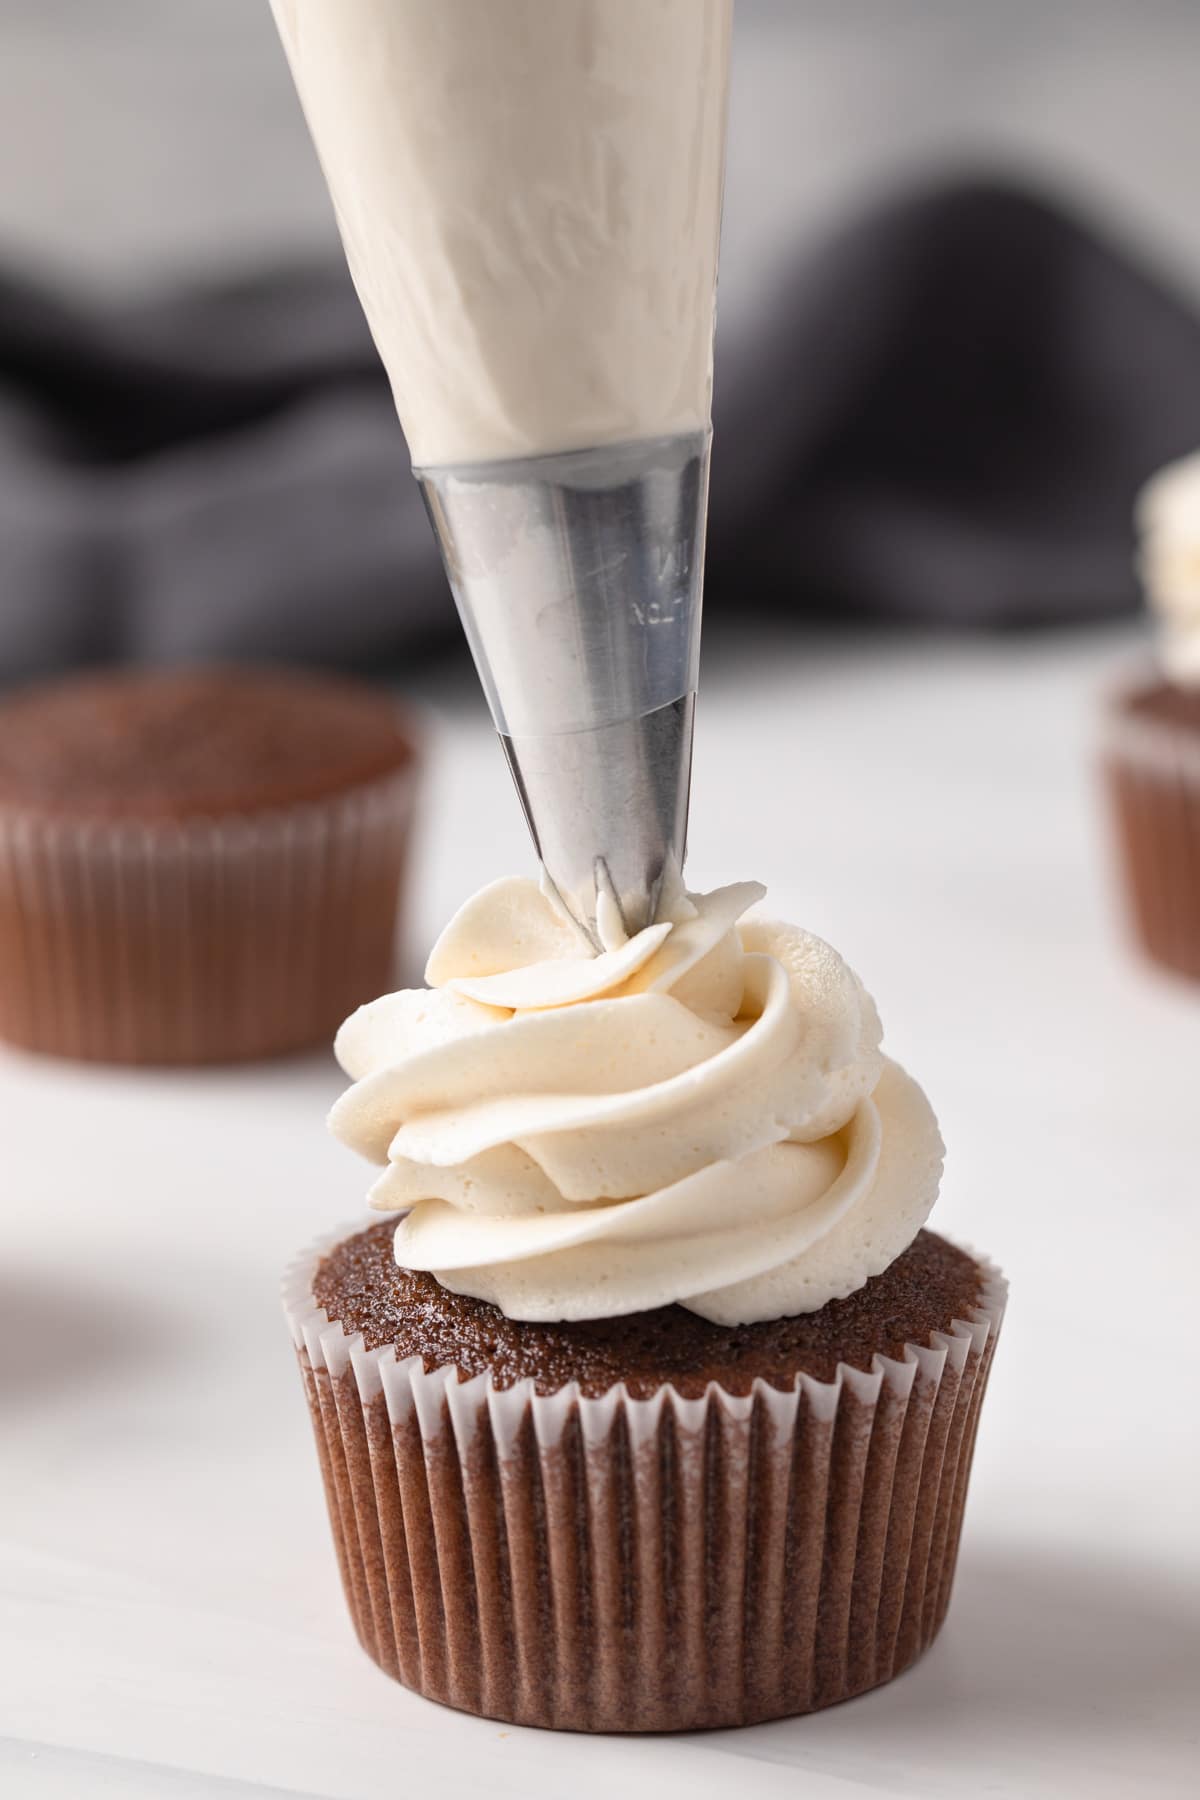 Frosting piped on Dr Pepper cupcakes